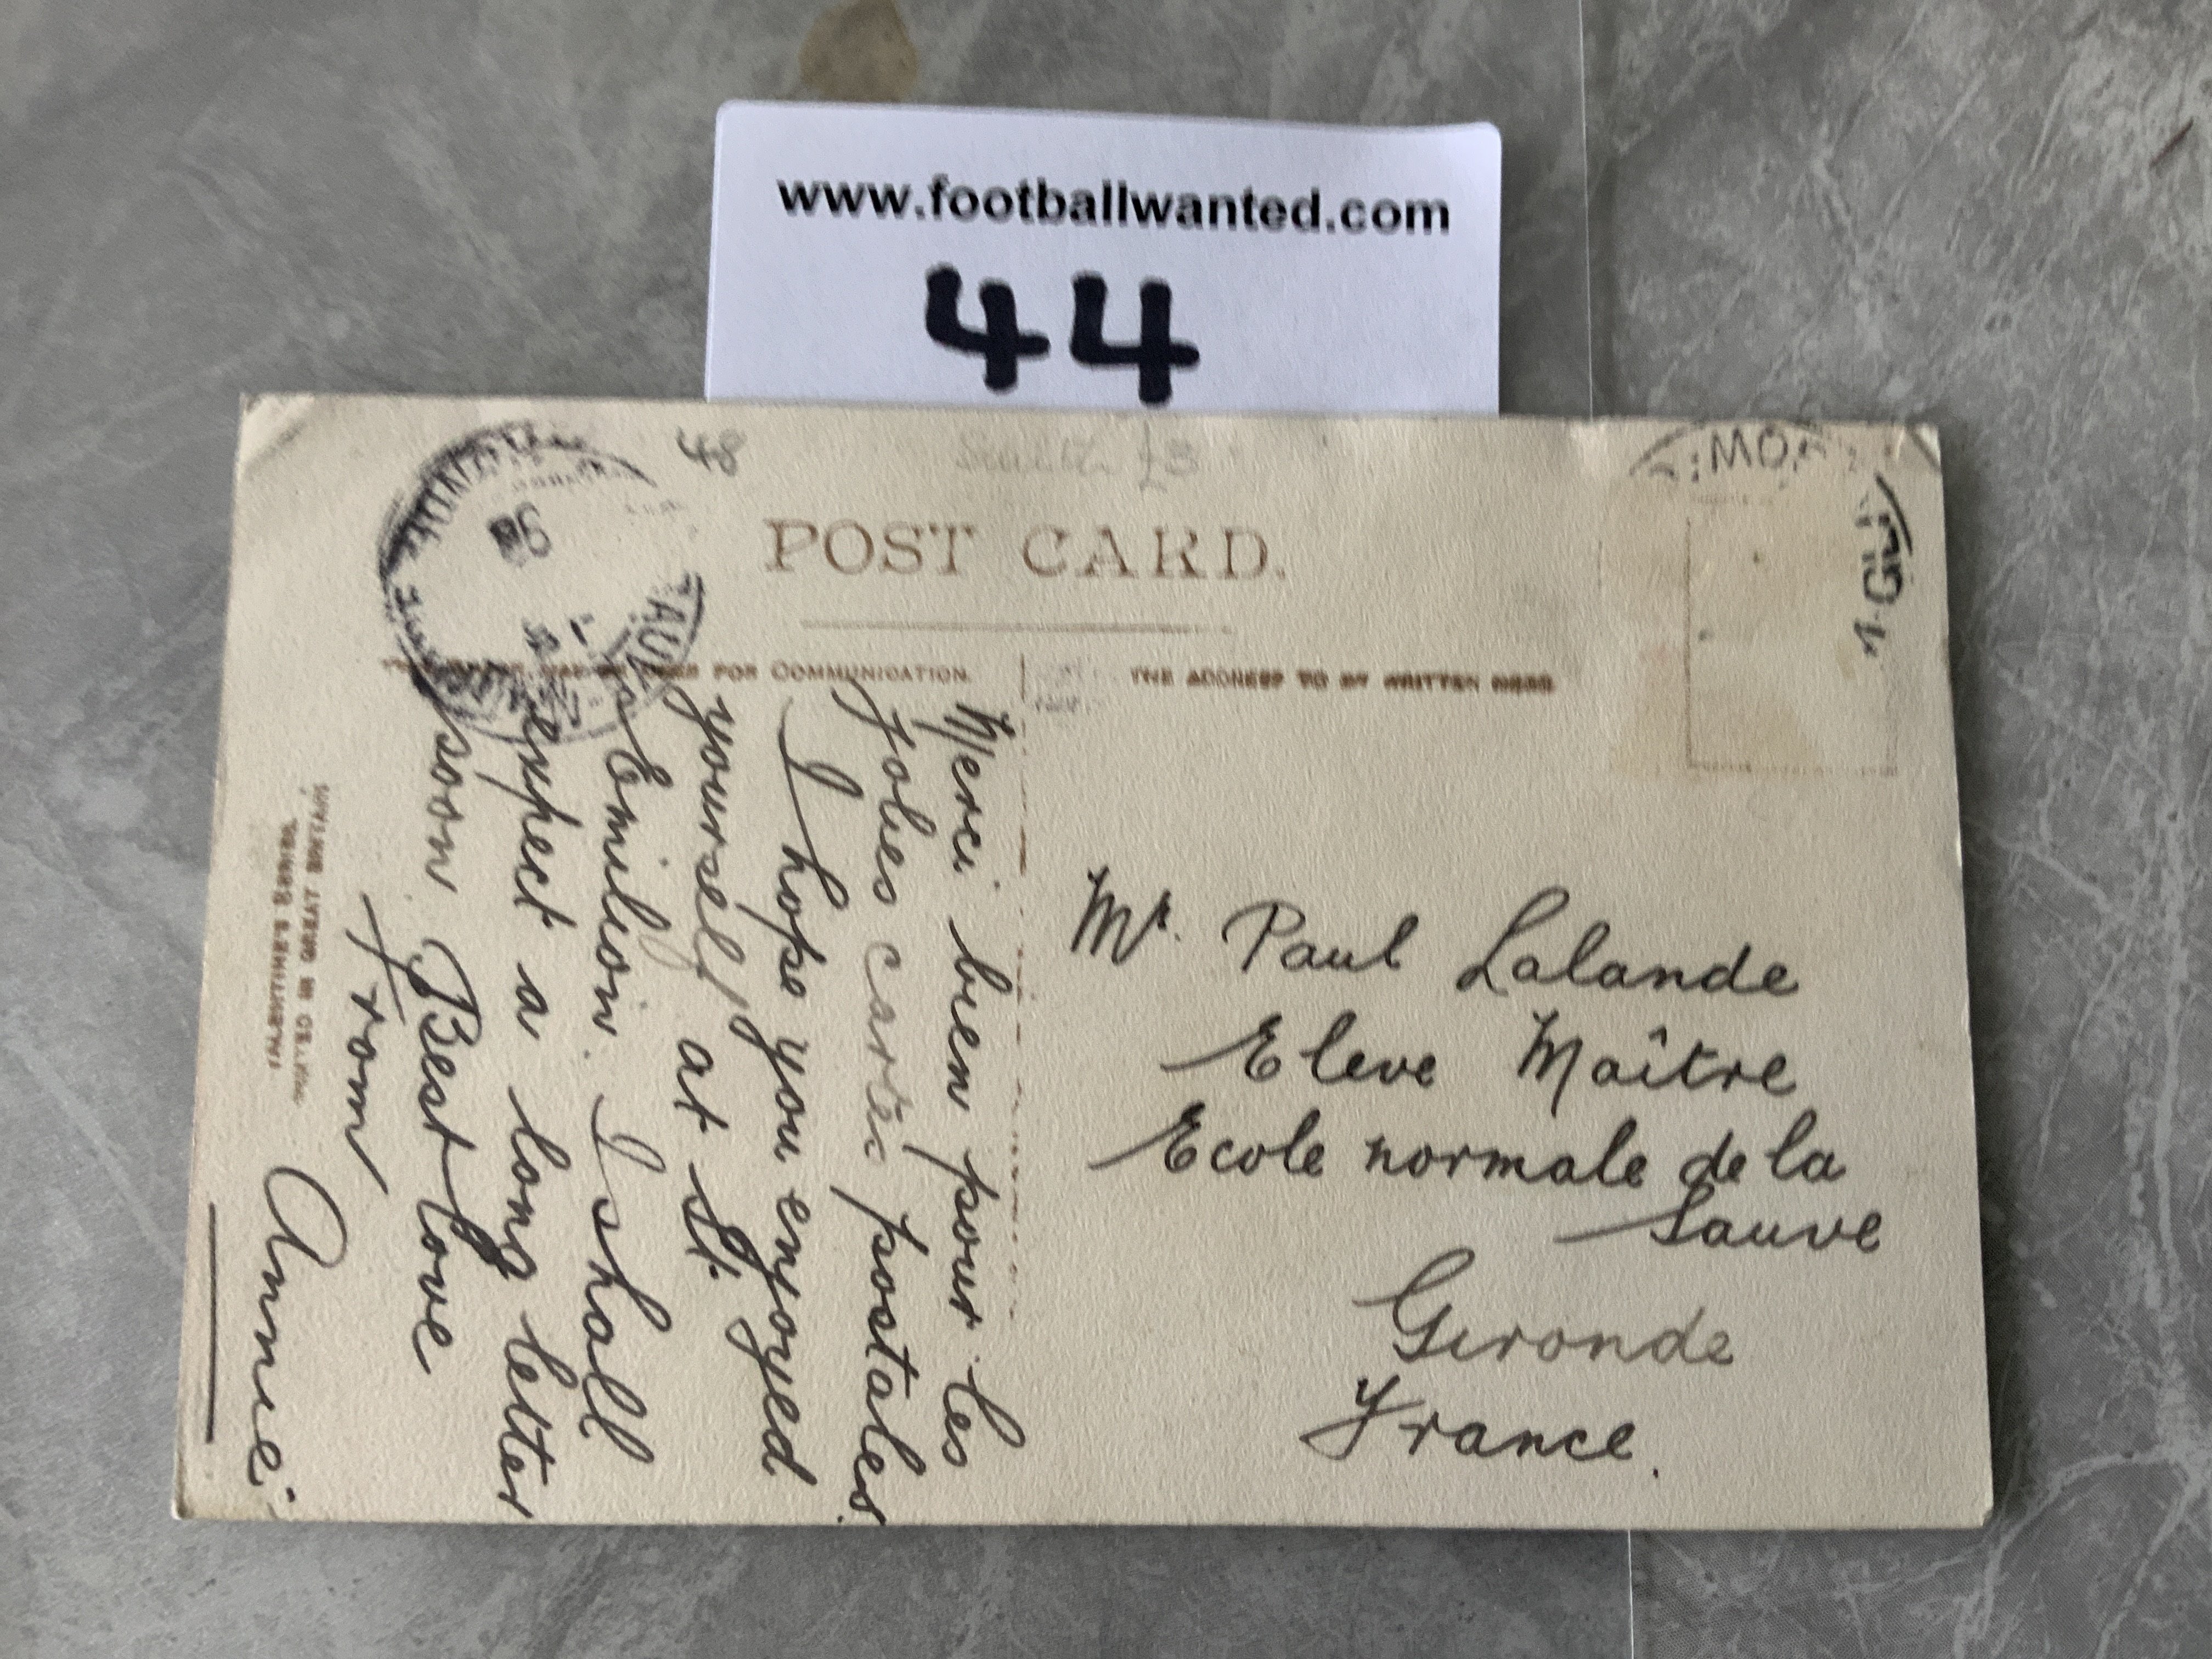 England v Scotland 1908 Football Postcard: Fair/good condition with writing to rear and stamp - Image 2 of 2